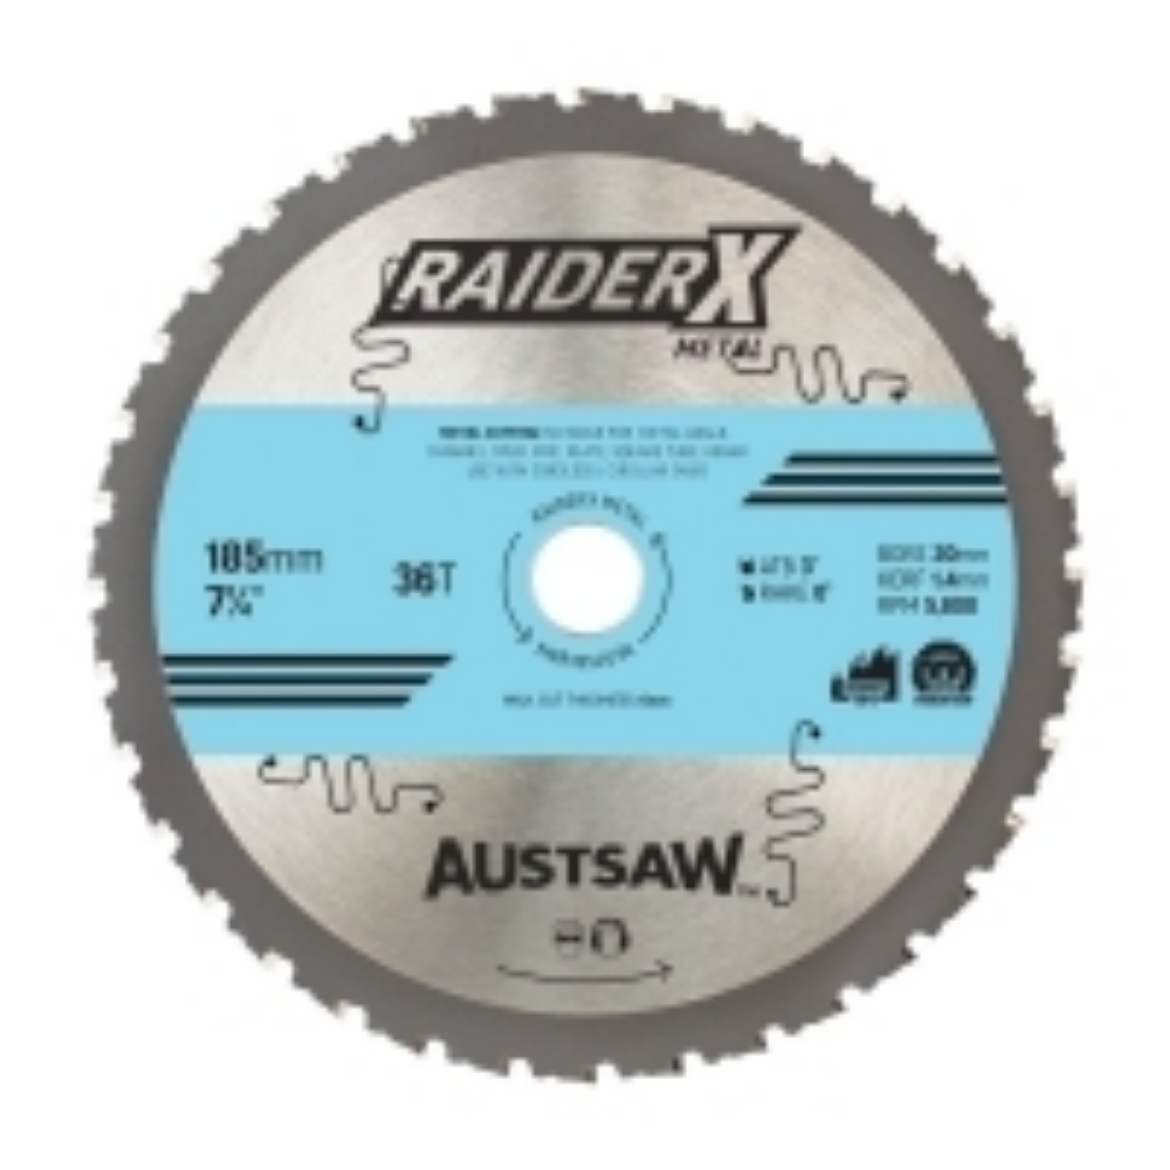 Picture of Austsaw RaiderX Metal Blade 185mm x 20 x 36T